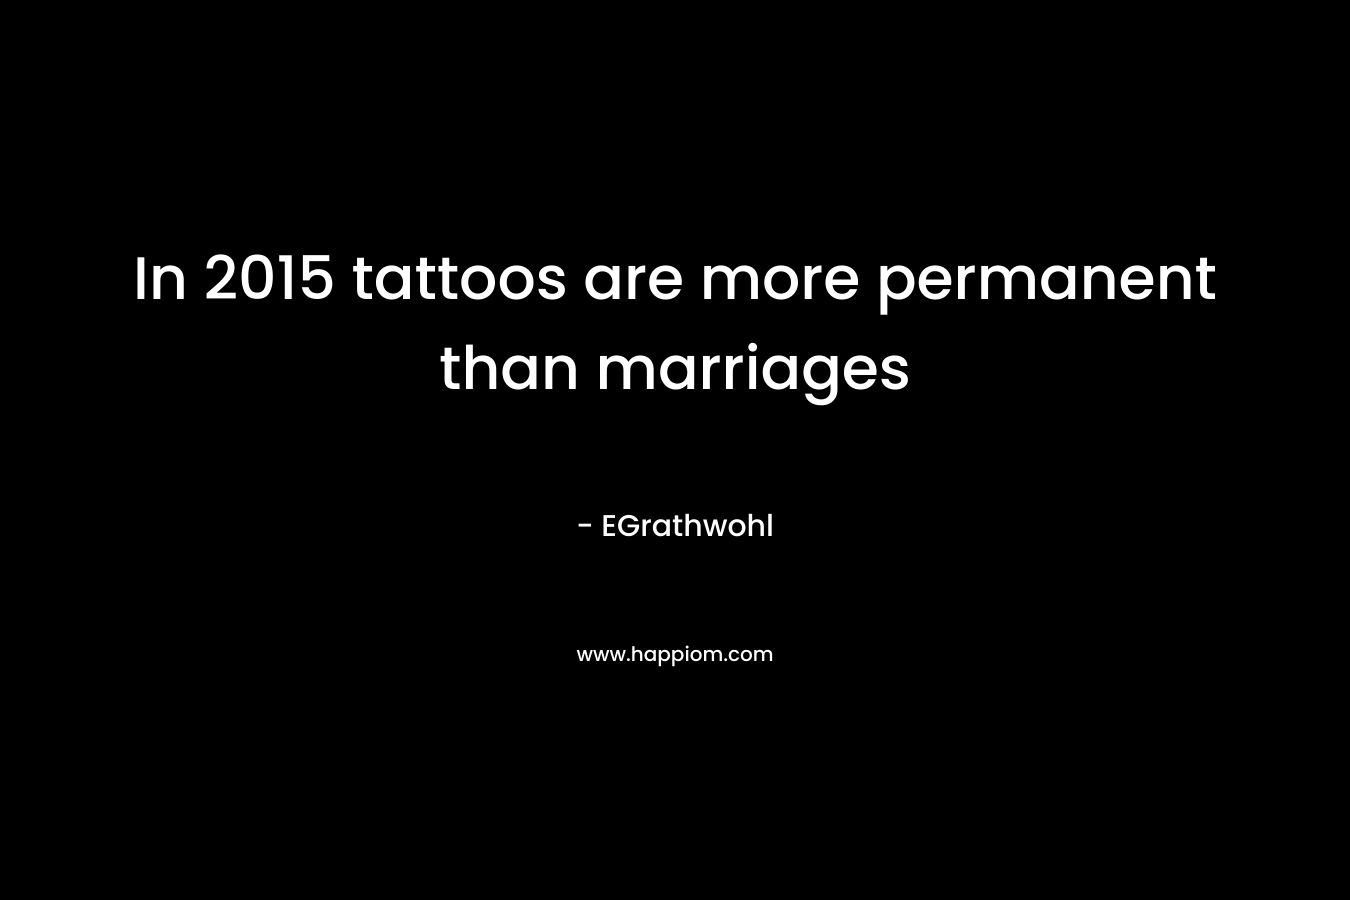 In 2015 tattoos are more permanent than marriages – EGrathwohl